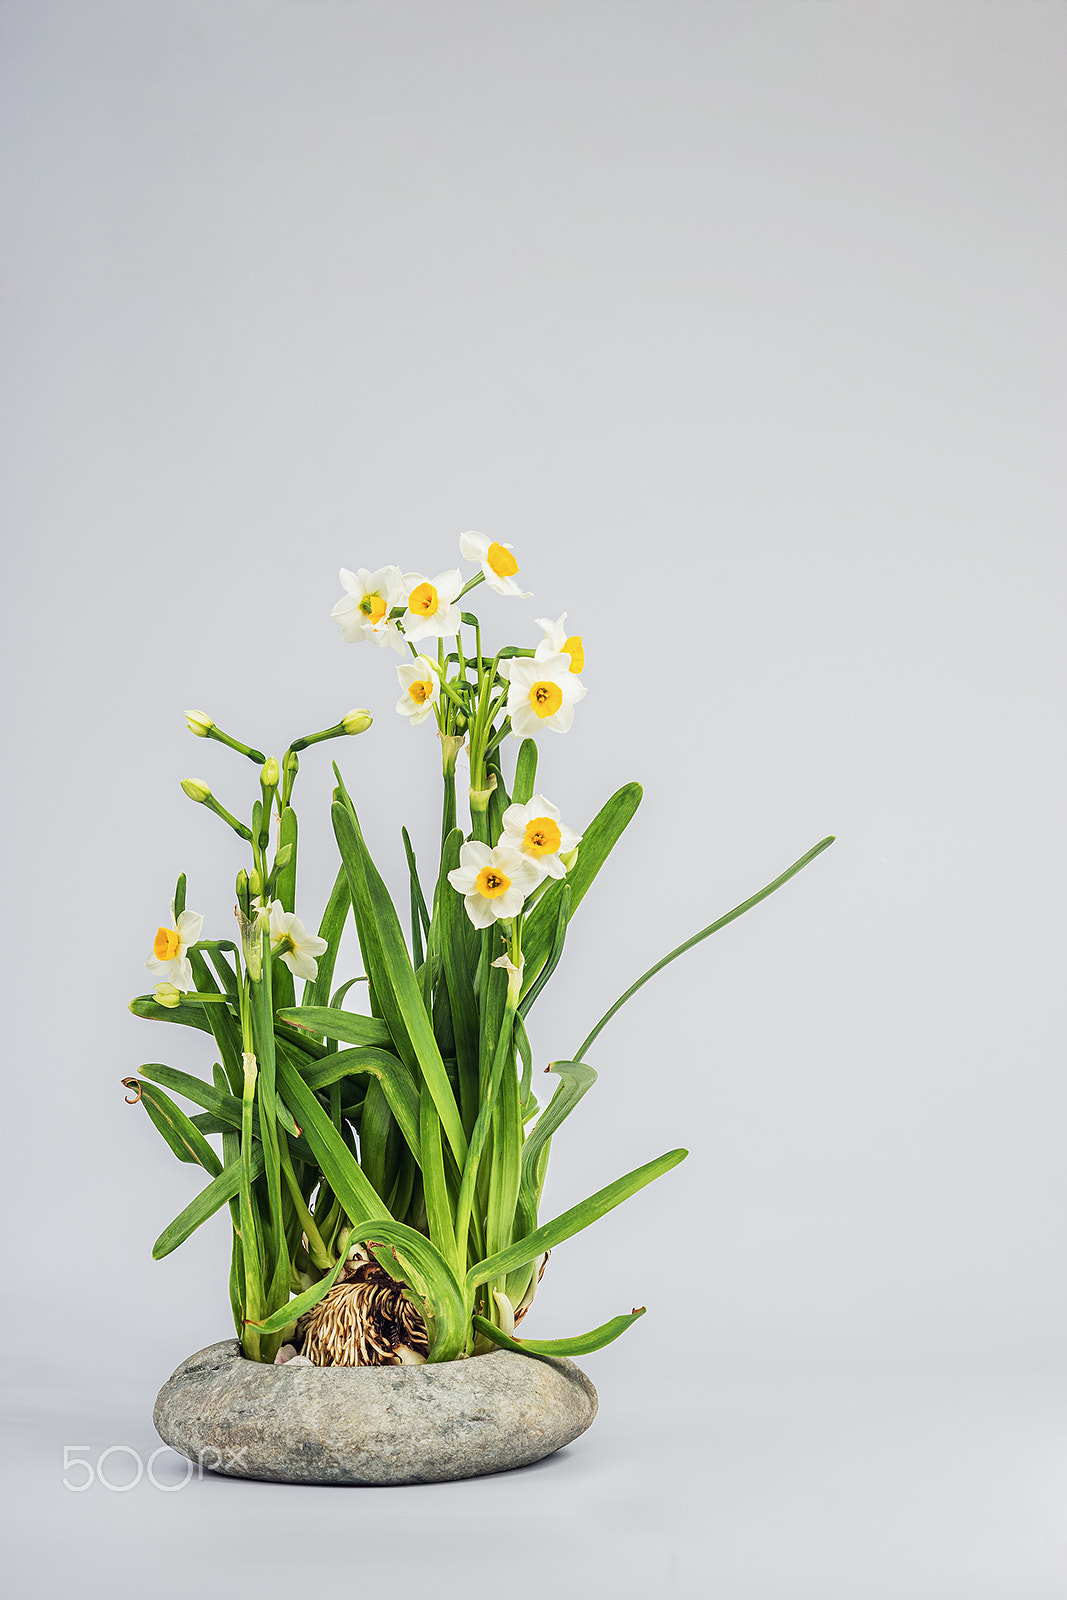 Sony a99 II sample photo. Narcissus photography